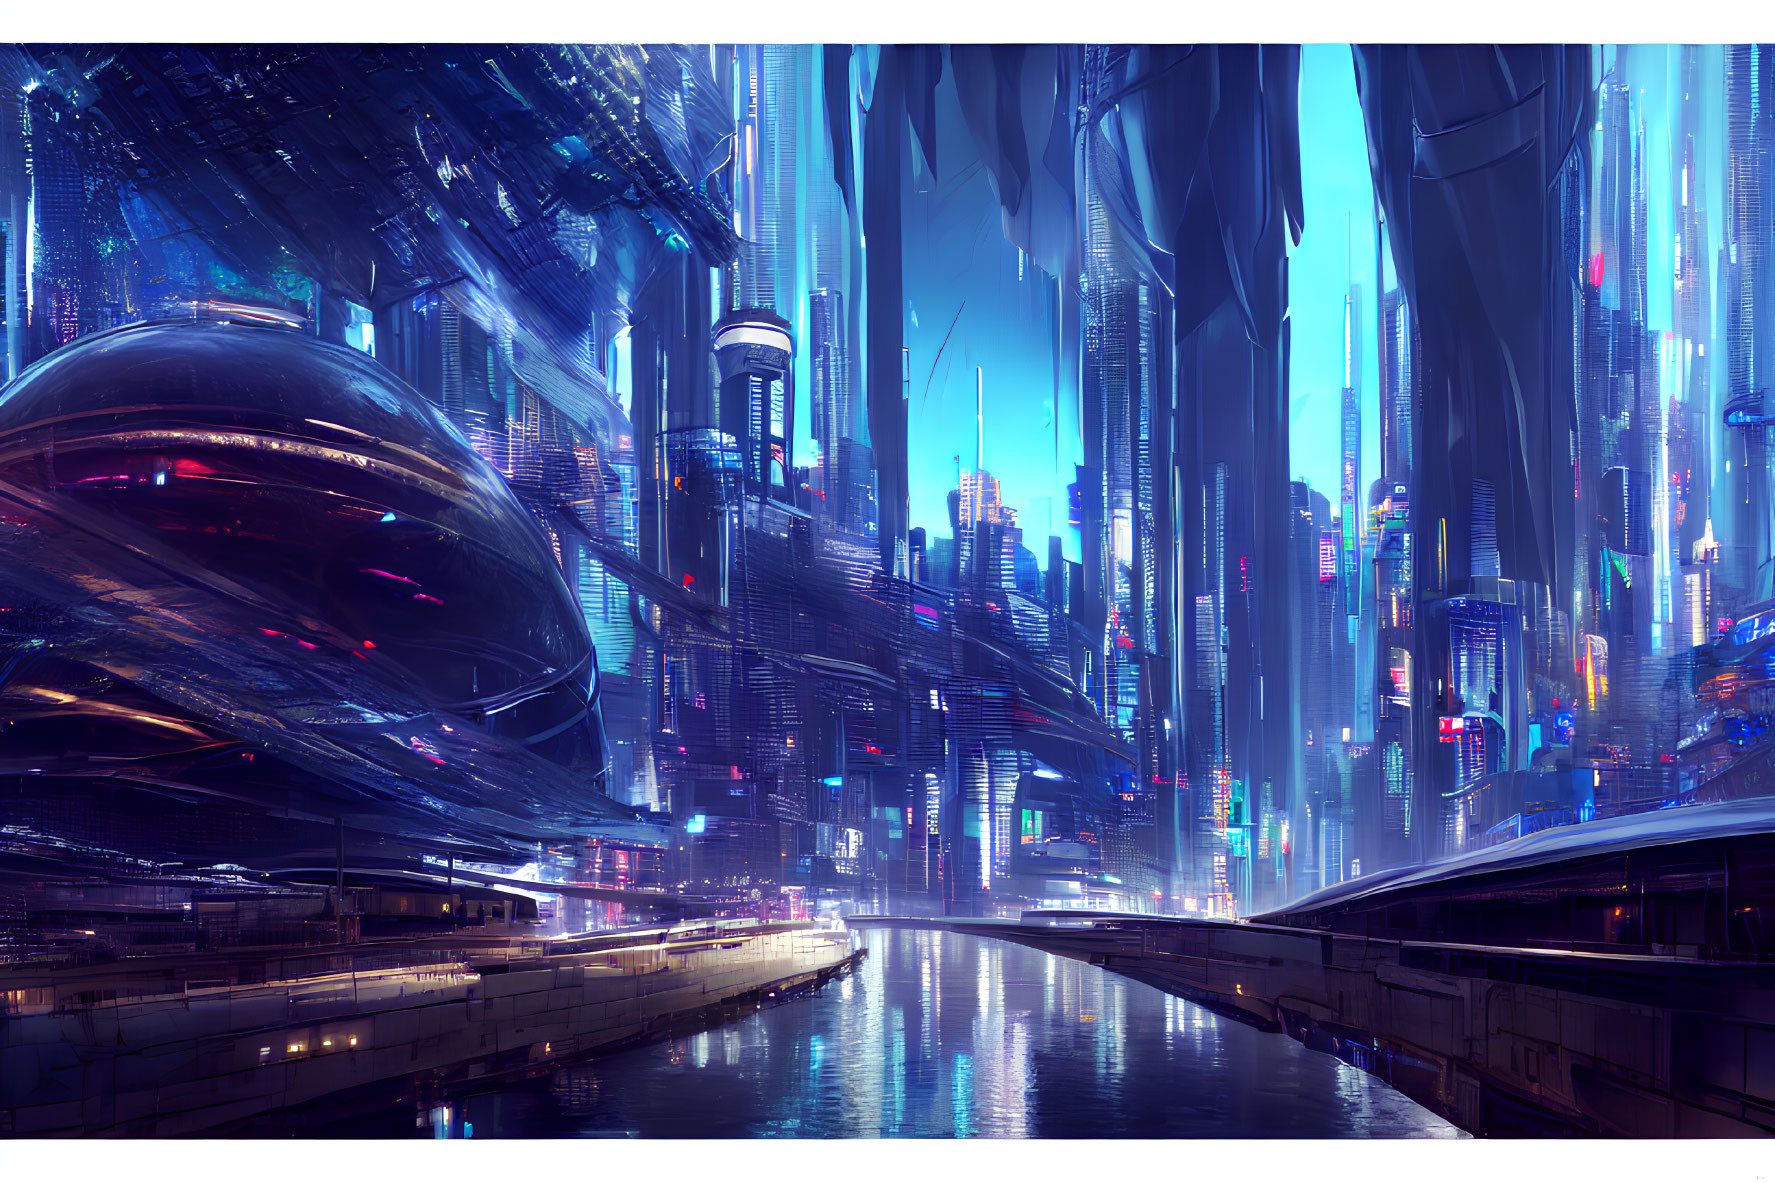 Futuristic cityscape with skyscrapers, neon lights, and twilight sky